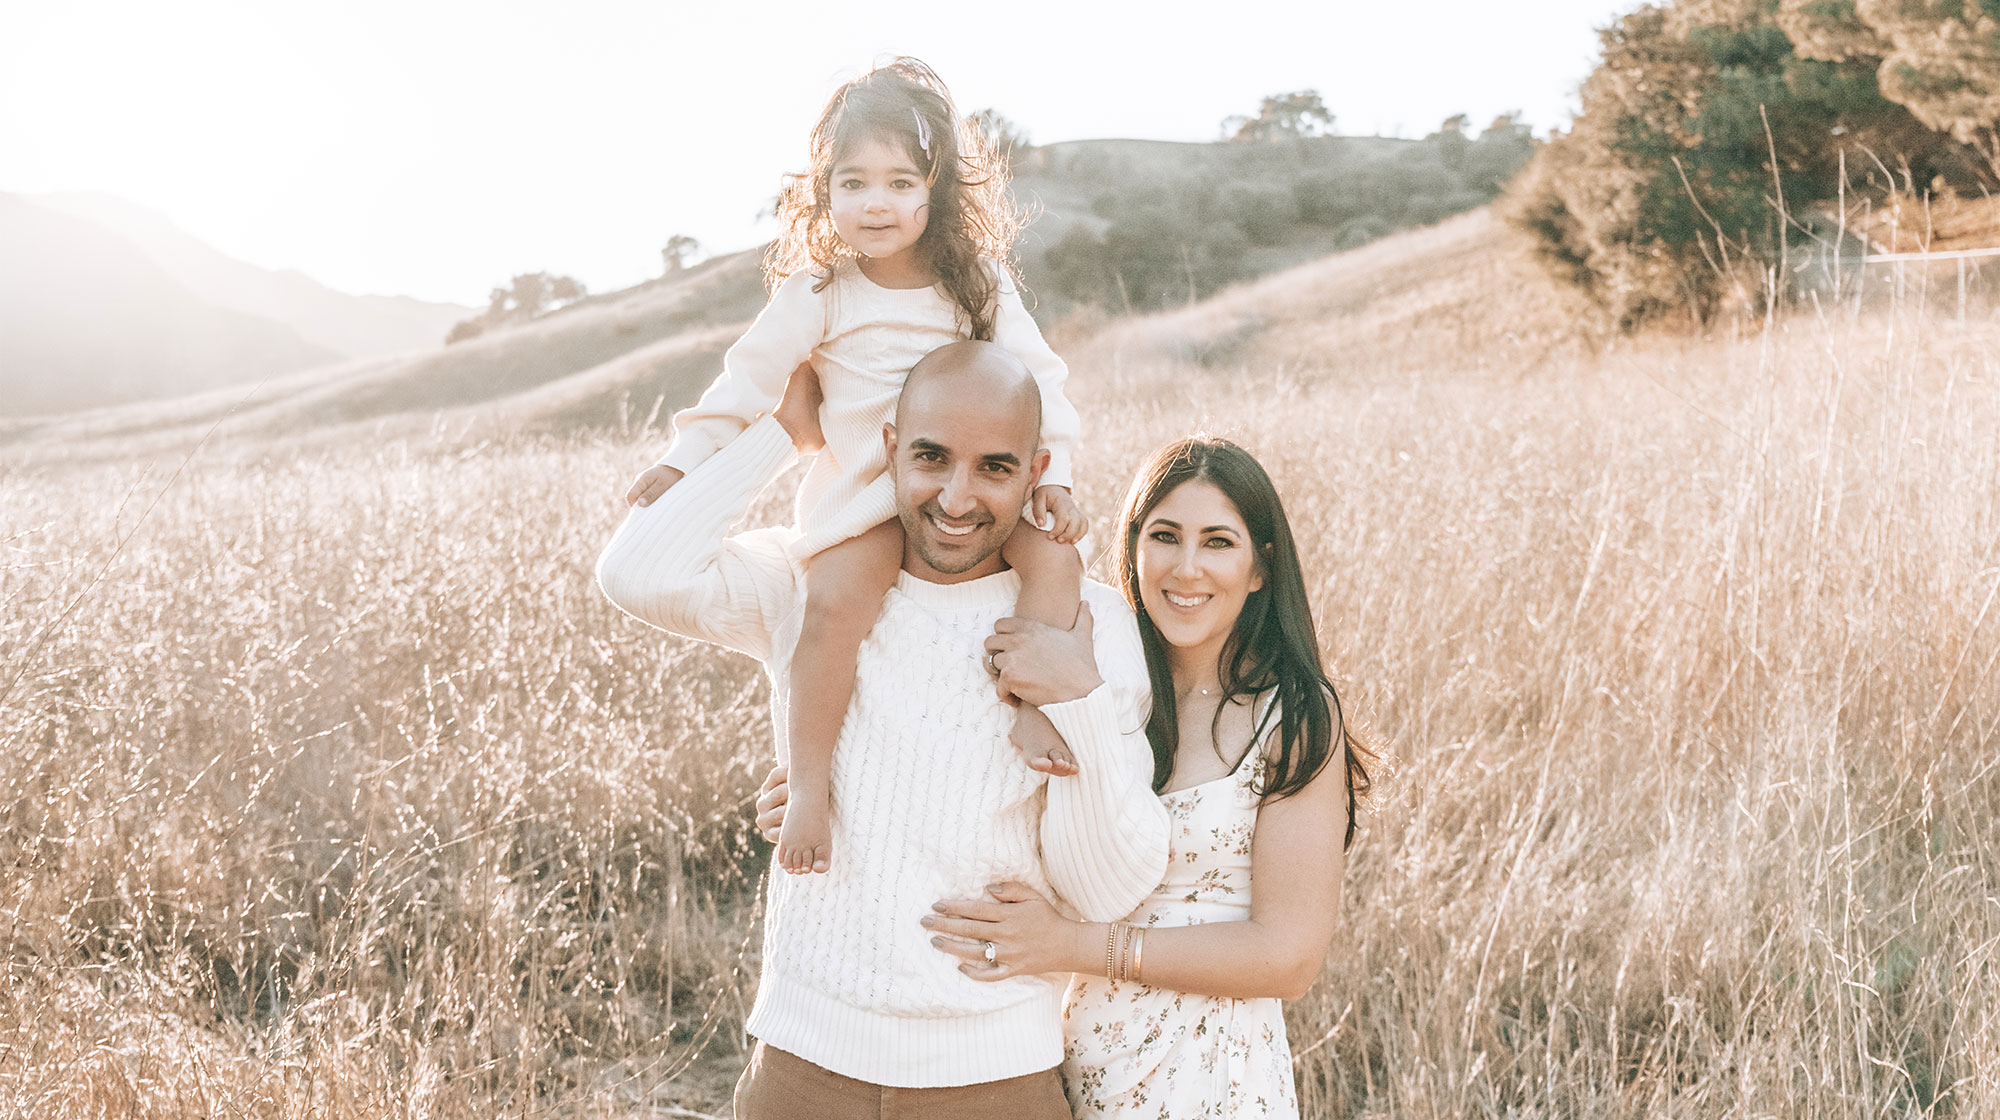 Professional photo of Jonathan beside his wife and daughter on his shoulders standing near hill in the city of Calabasas